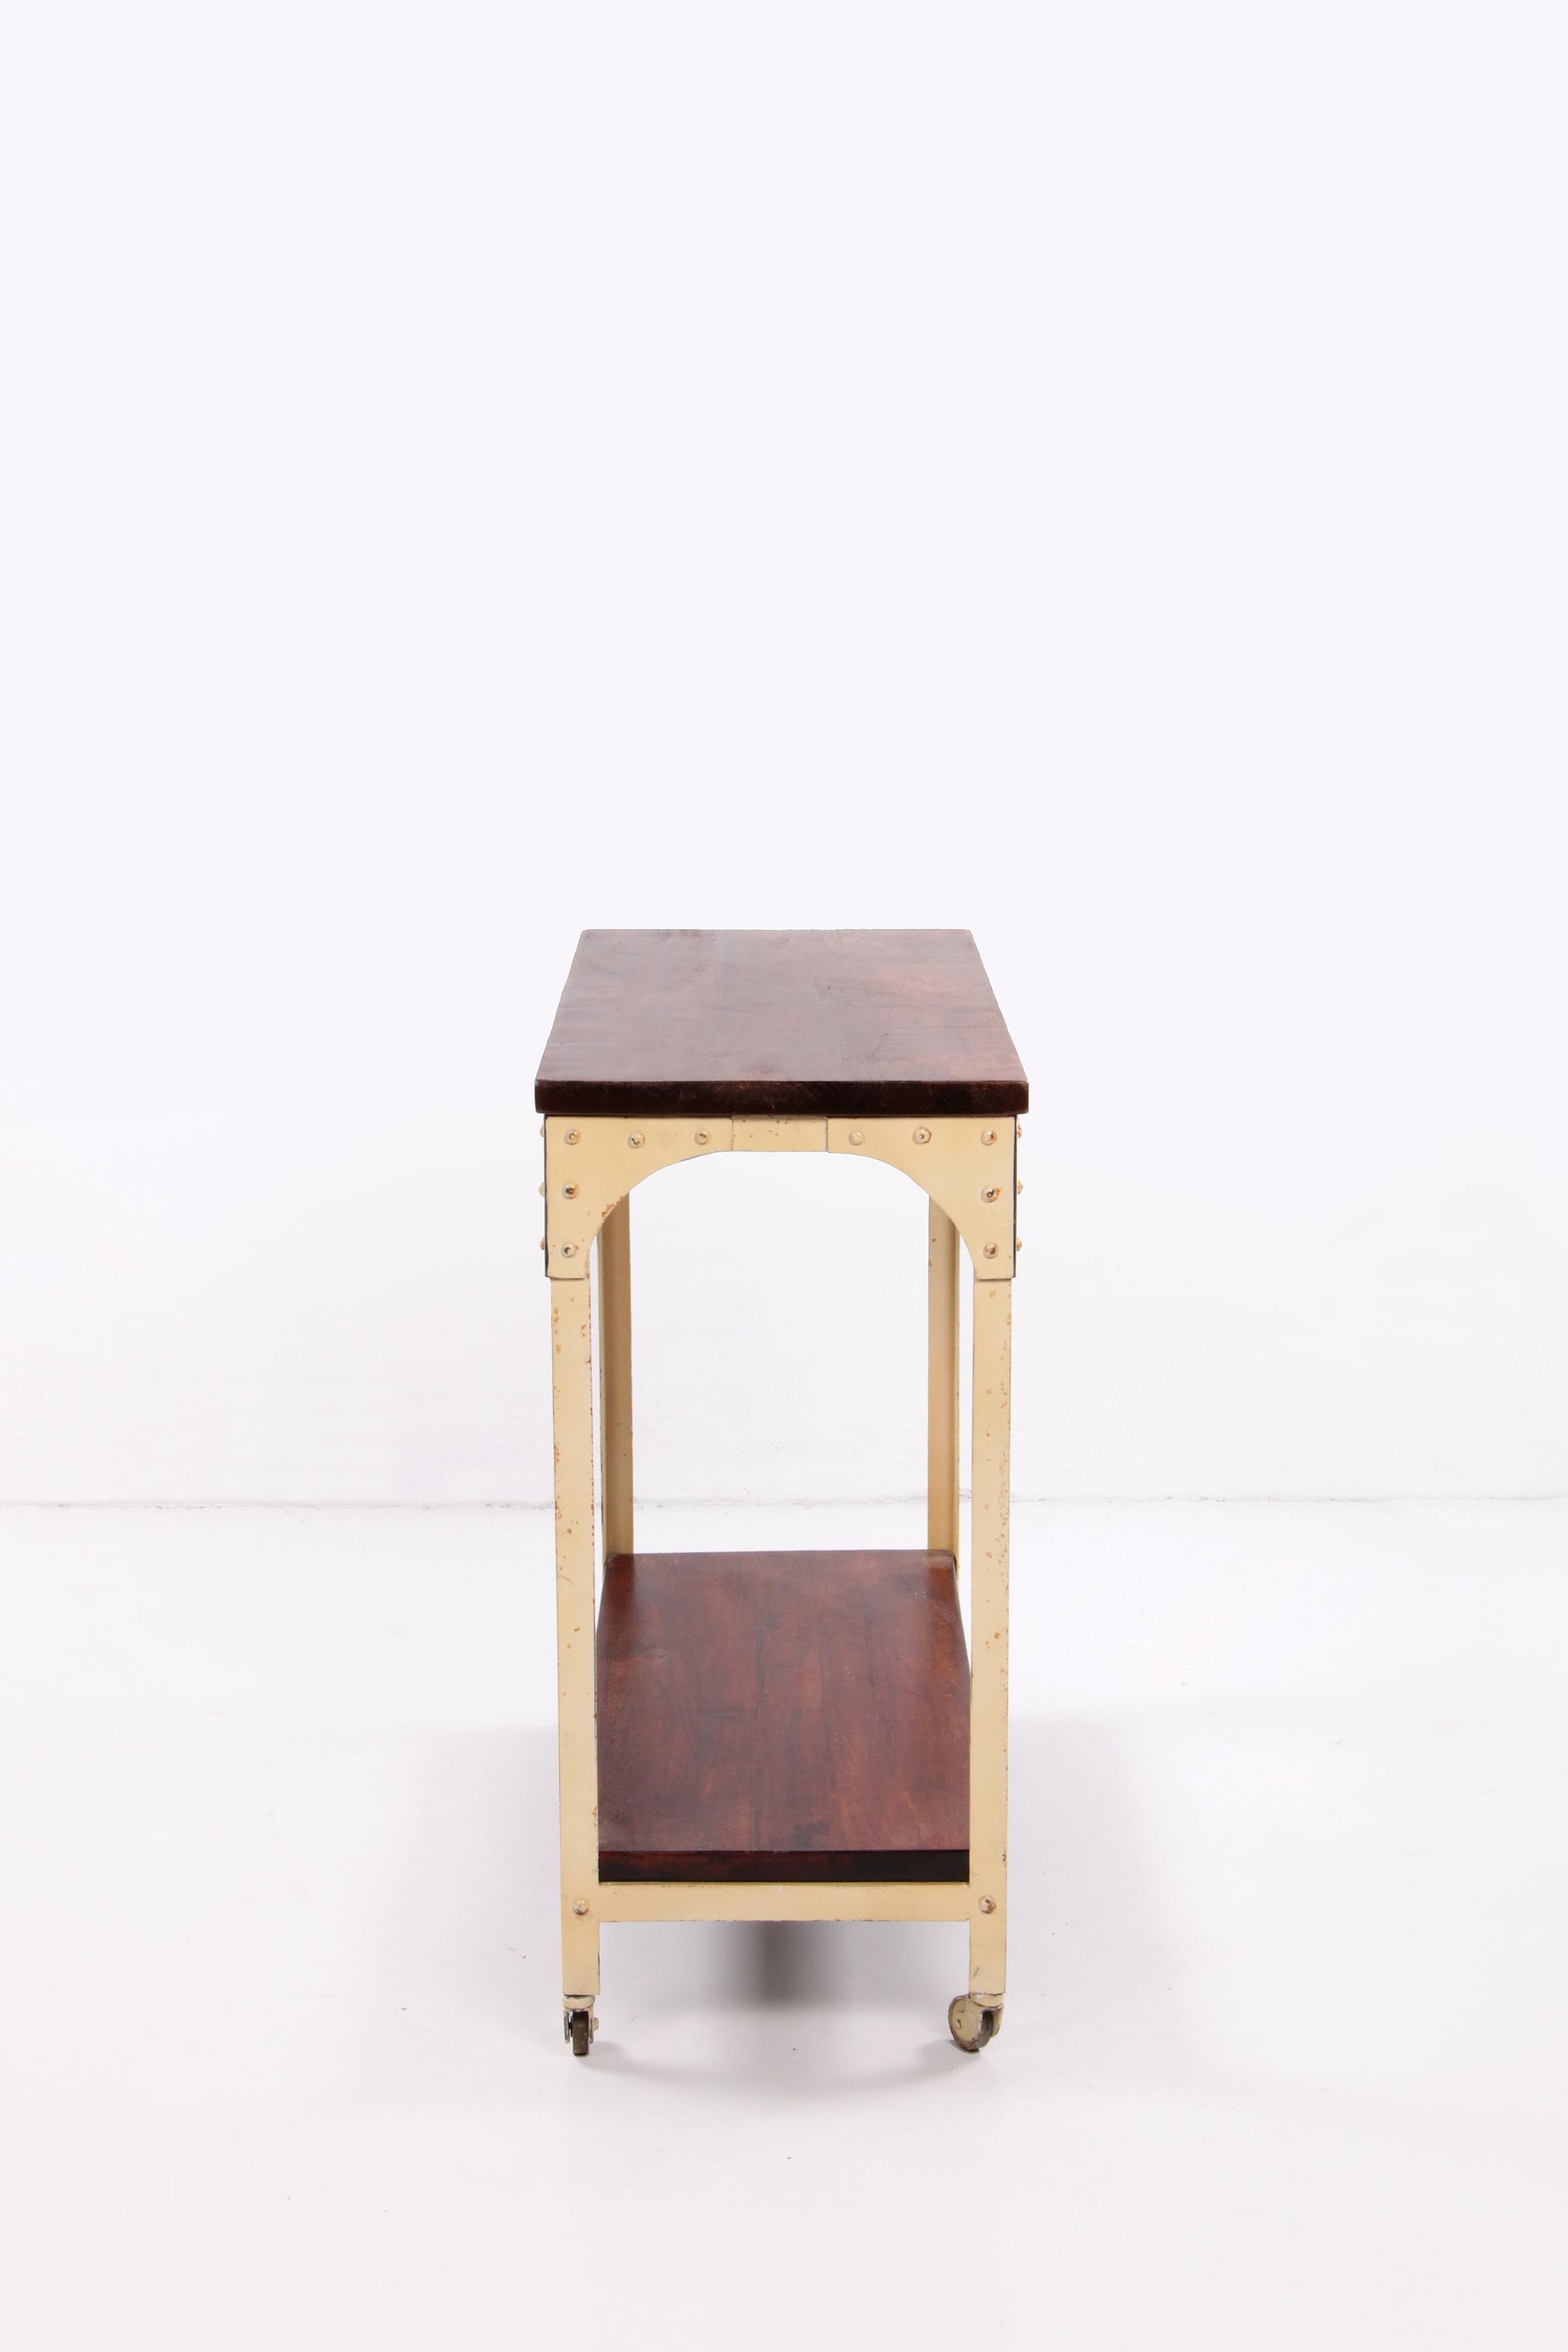 Industrial Robust Side Table Made of Wood and Metal, 1970 England For Sale 2